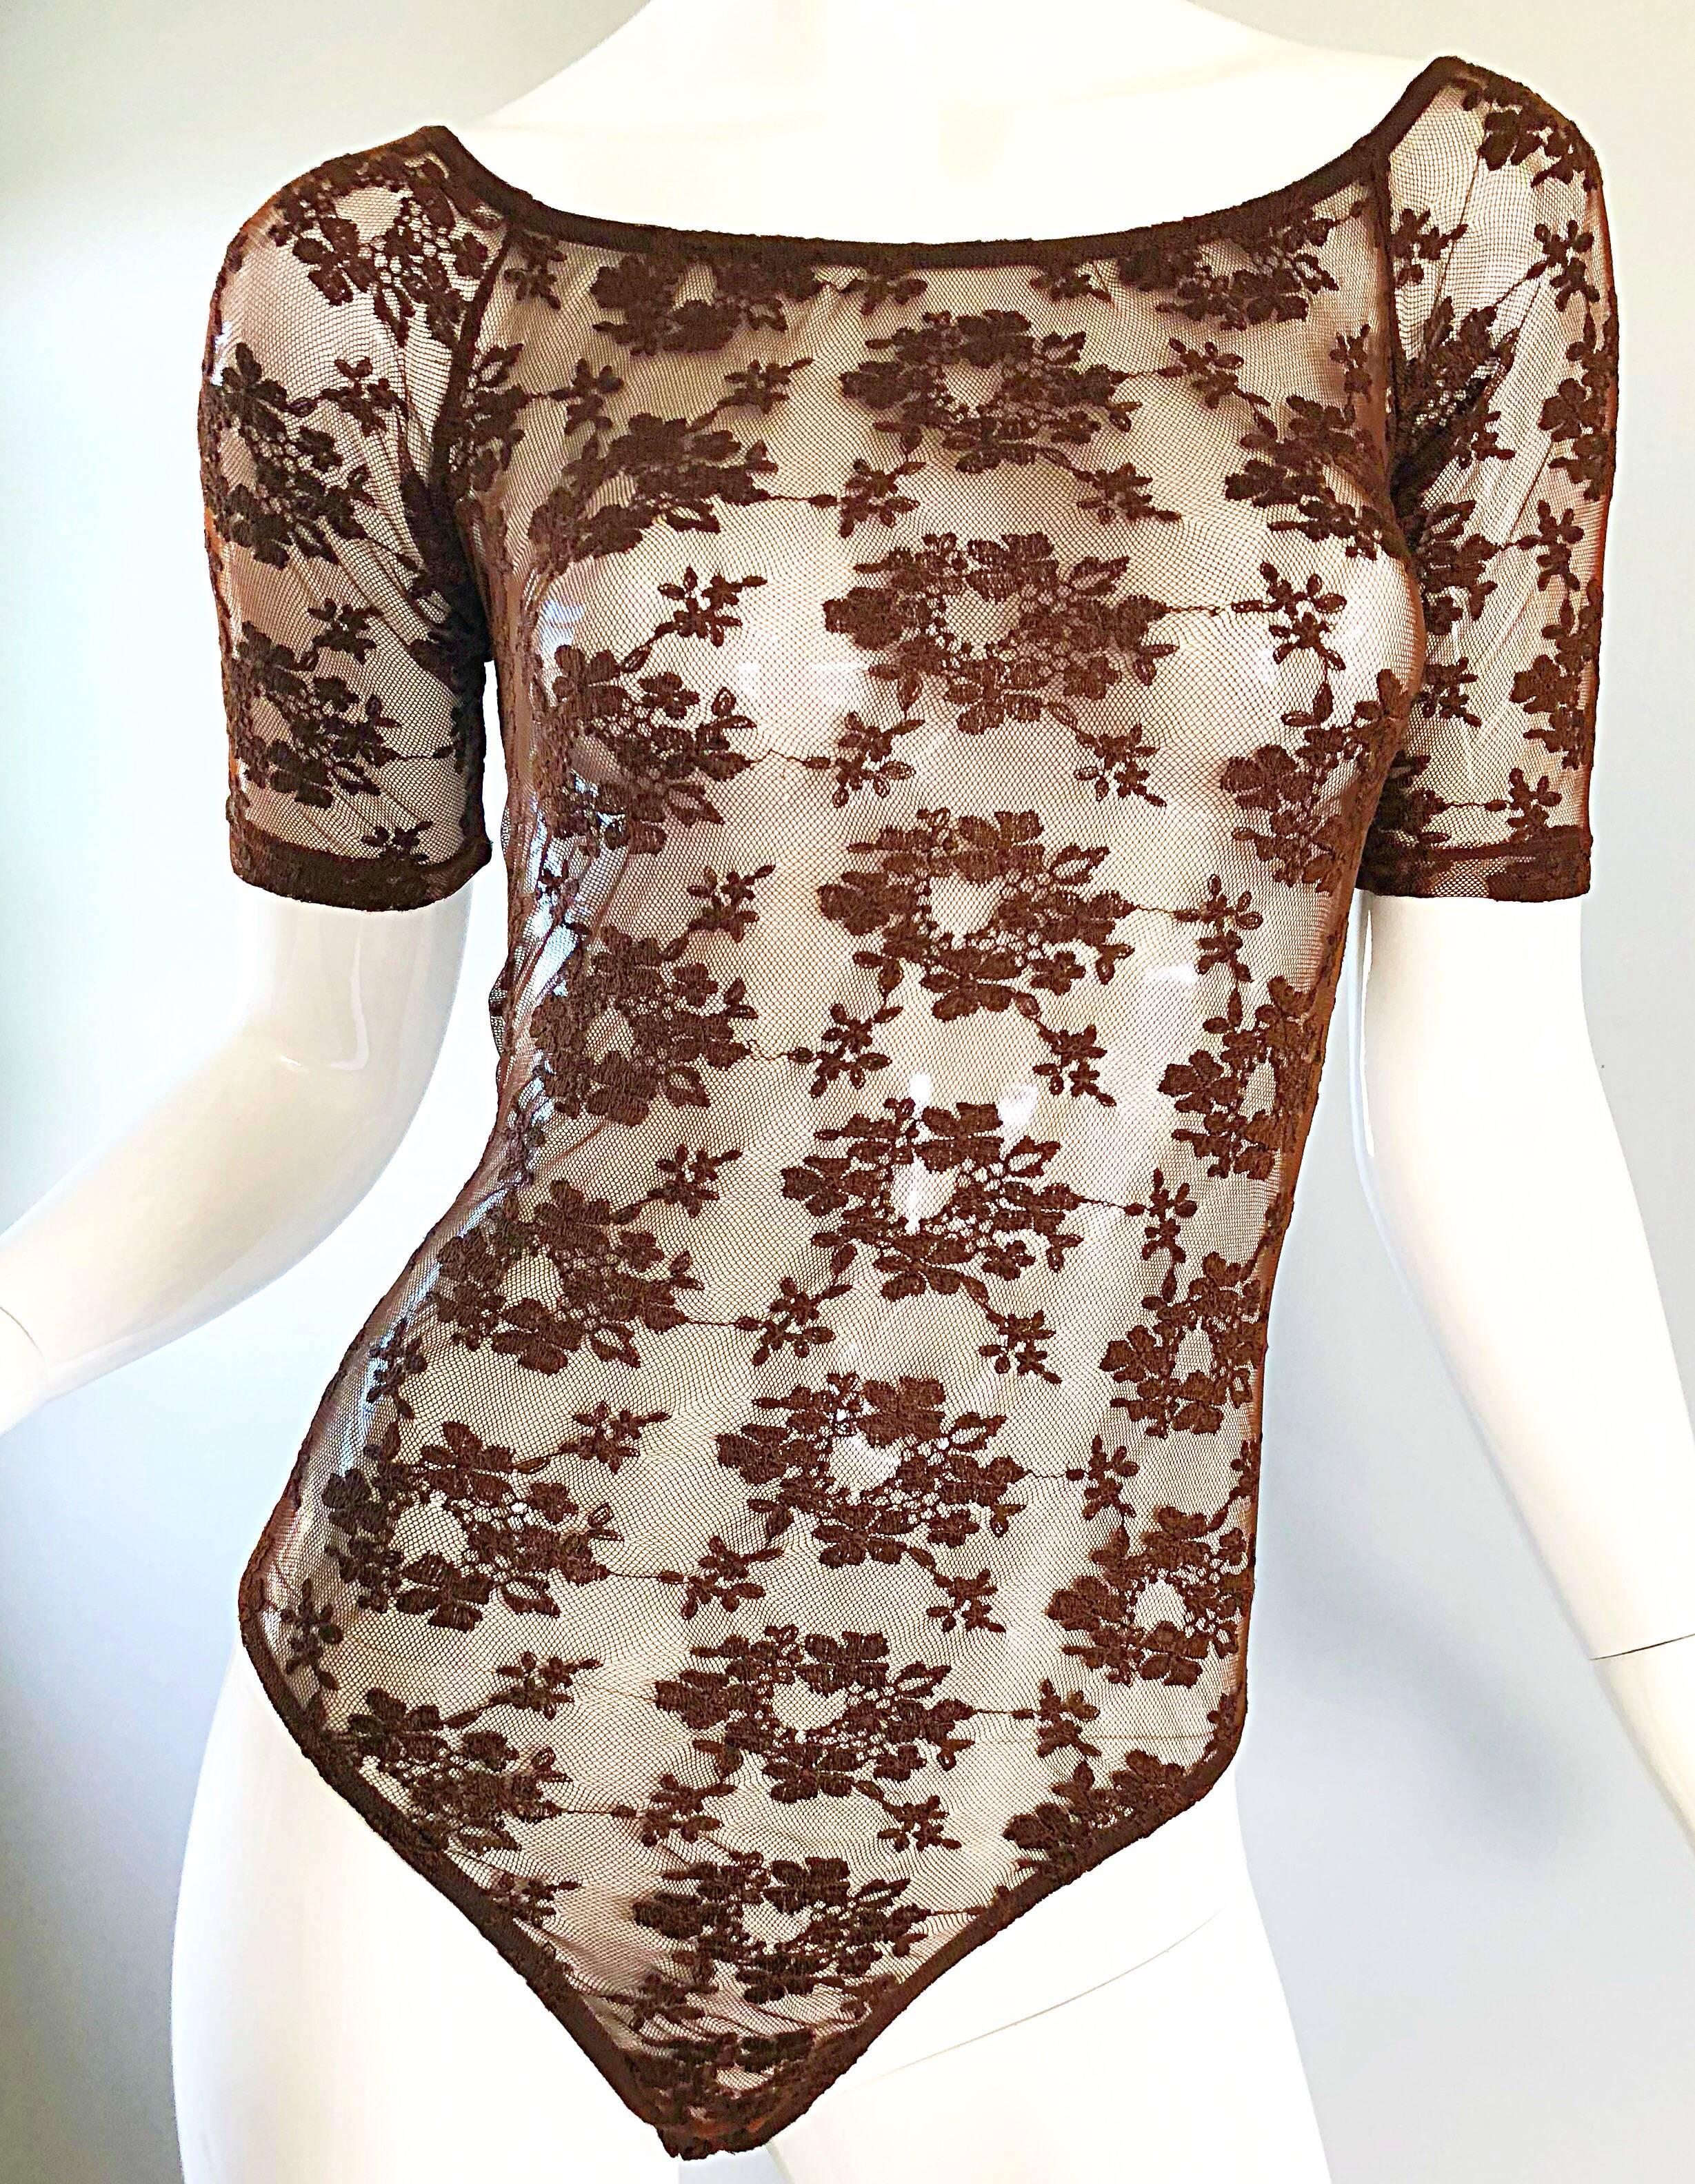 Rare Rifat Ozbek 1990s Choclate Brown French Lace 90s Vintage Bodysuit Top  For Sale 2